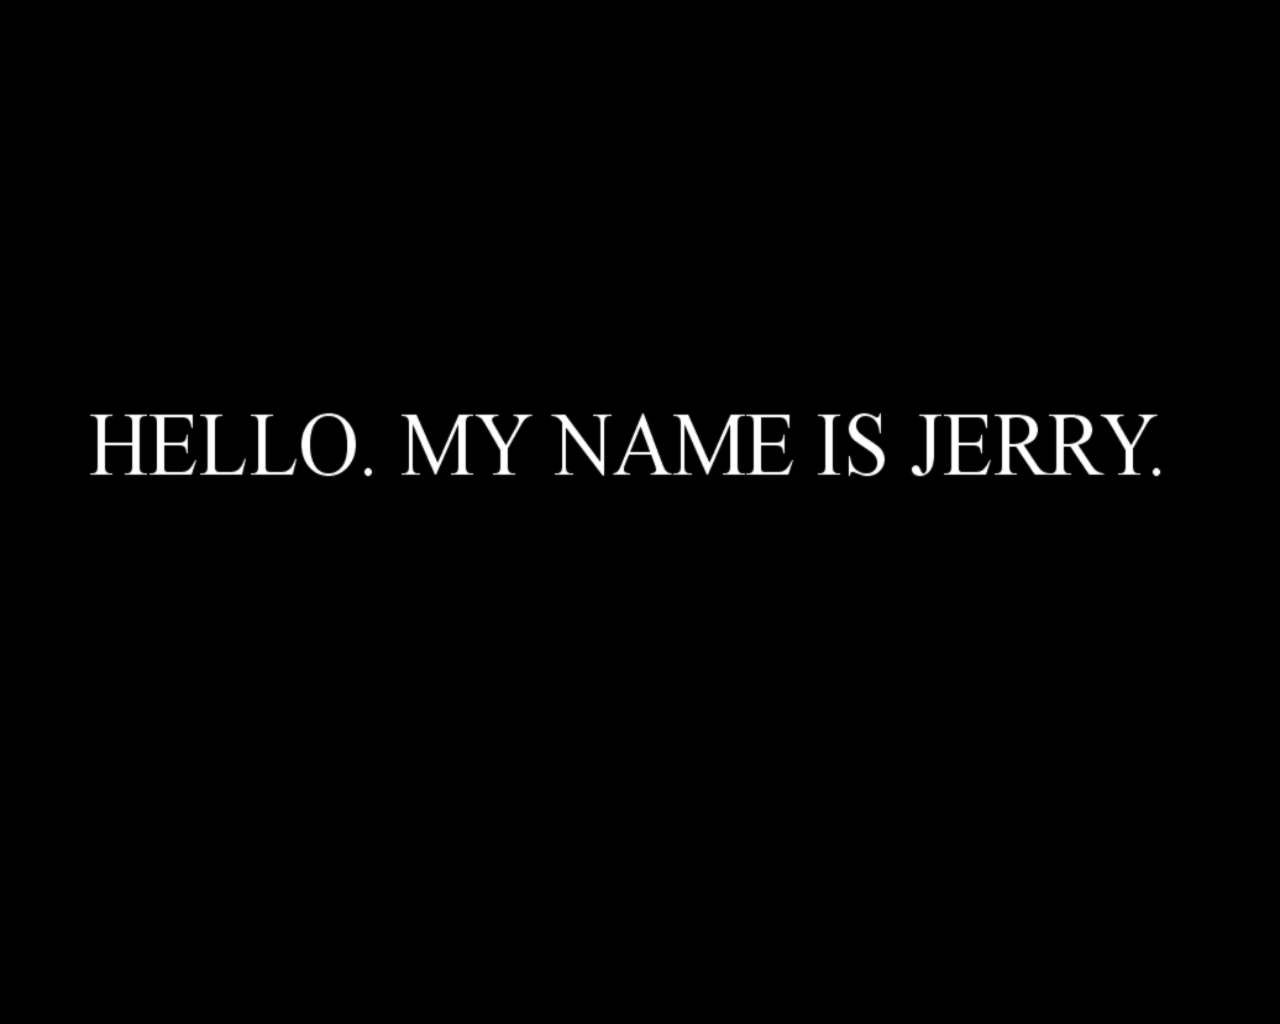 Jerry hello my name is A5Q